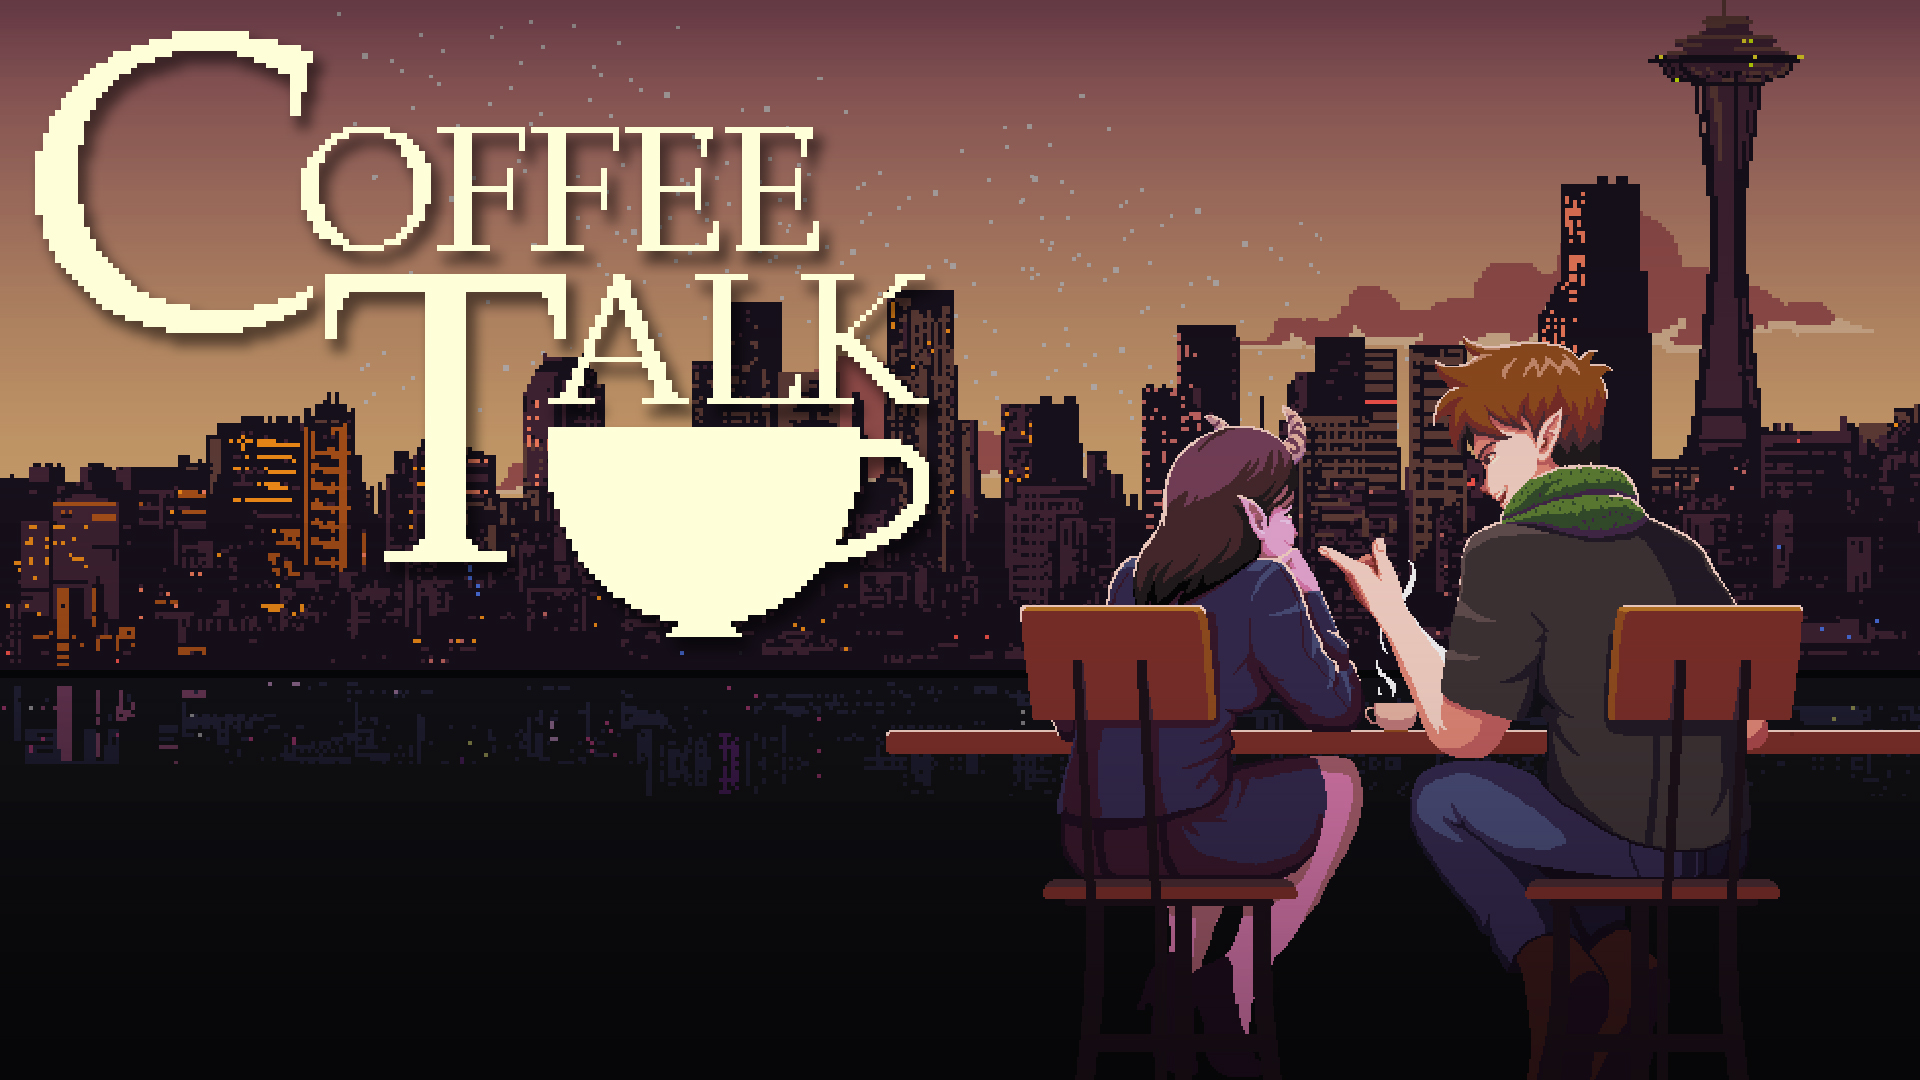 Coffee Talk Nintendo Switch Game Track Prices On Eshop For Discounted Games